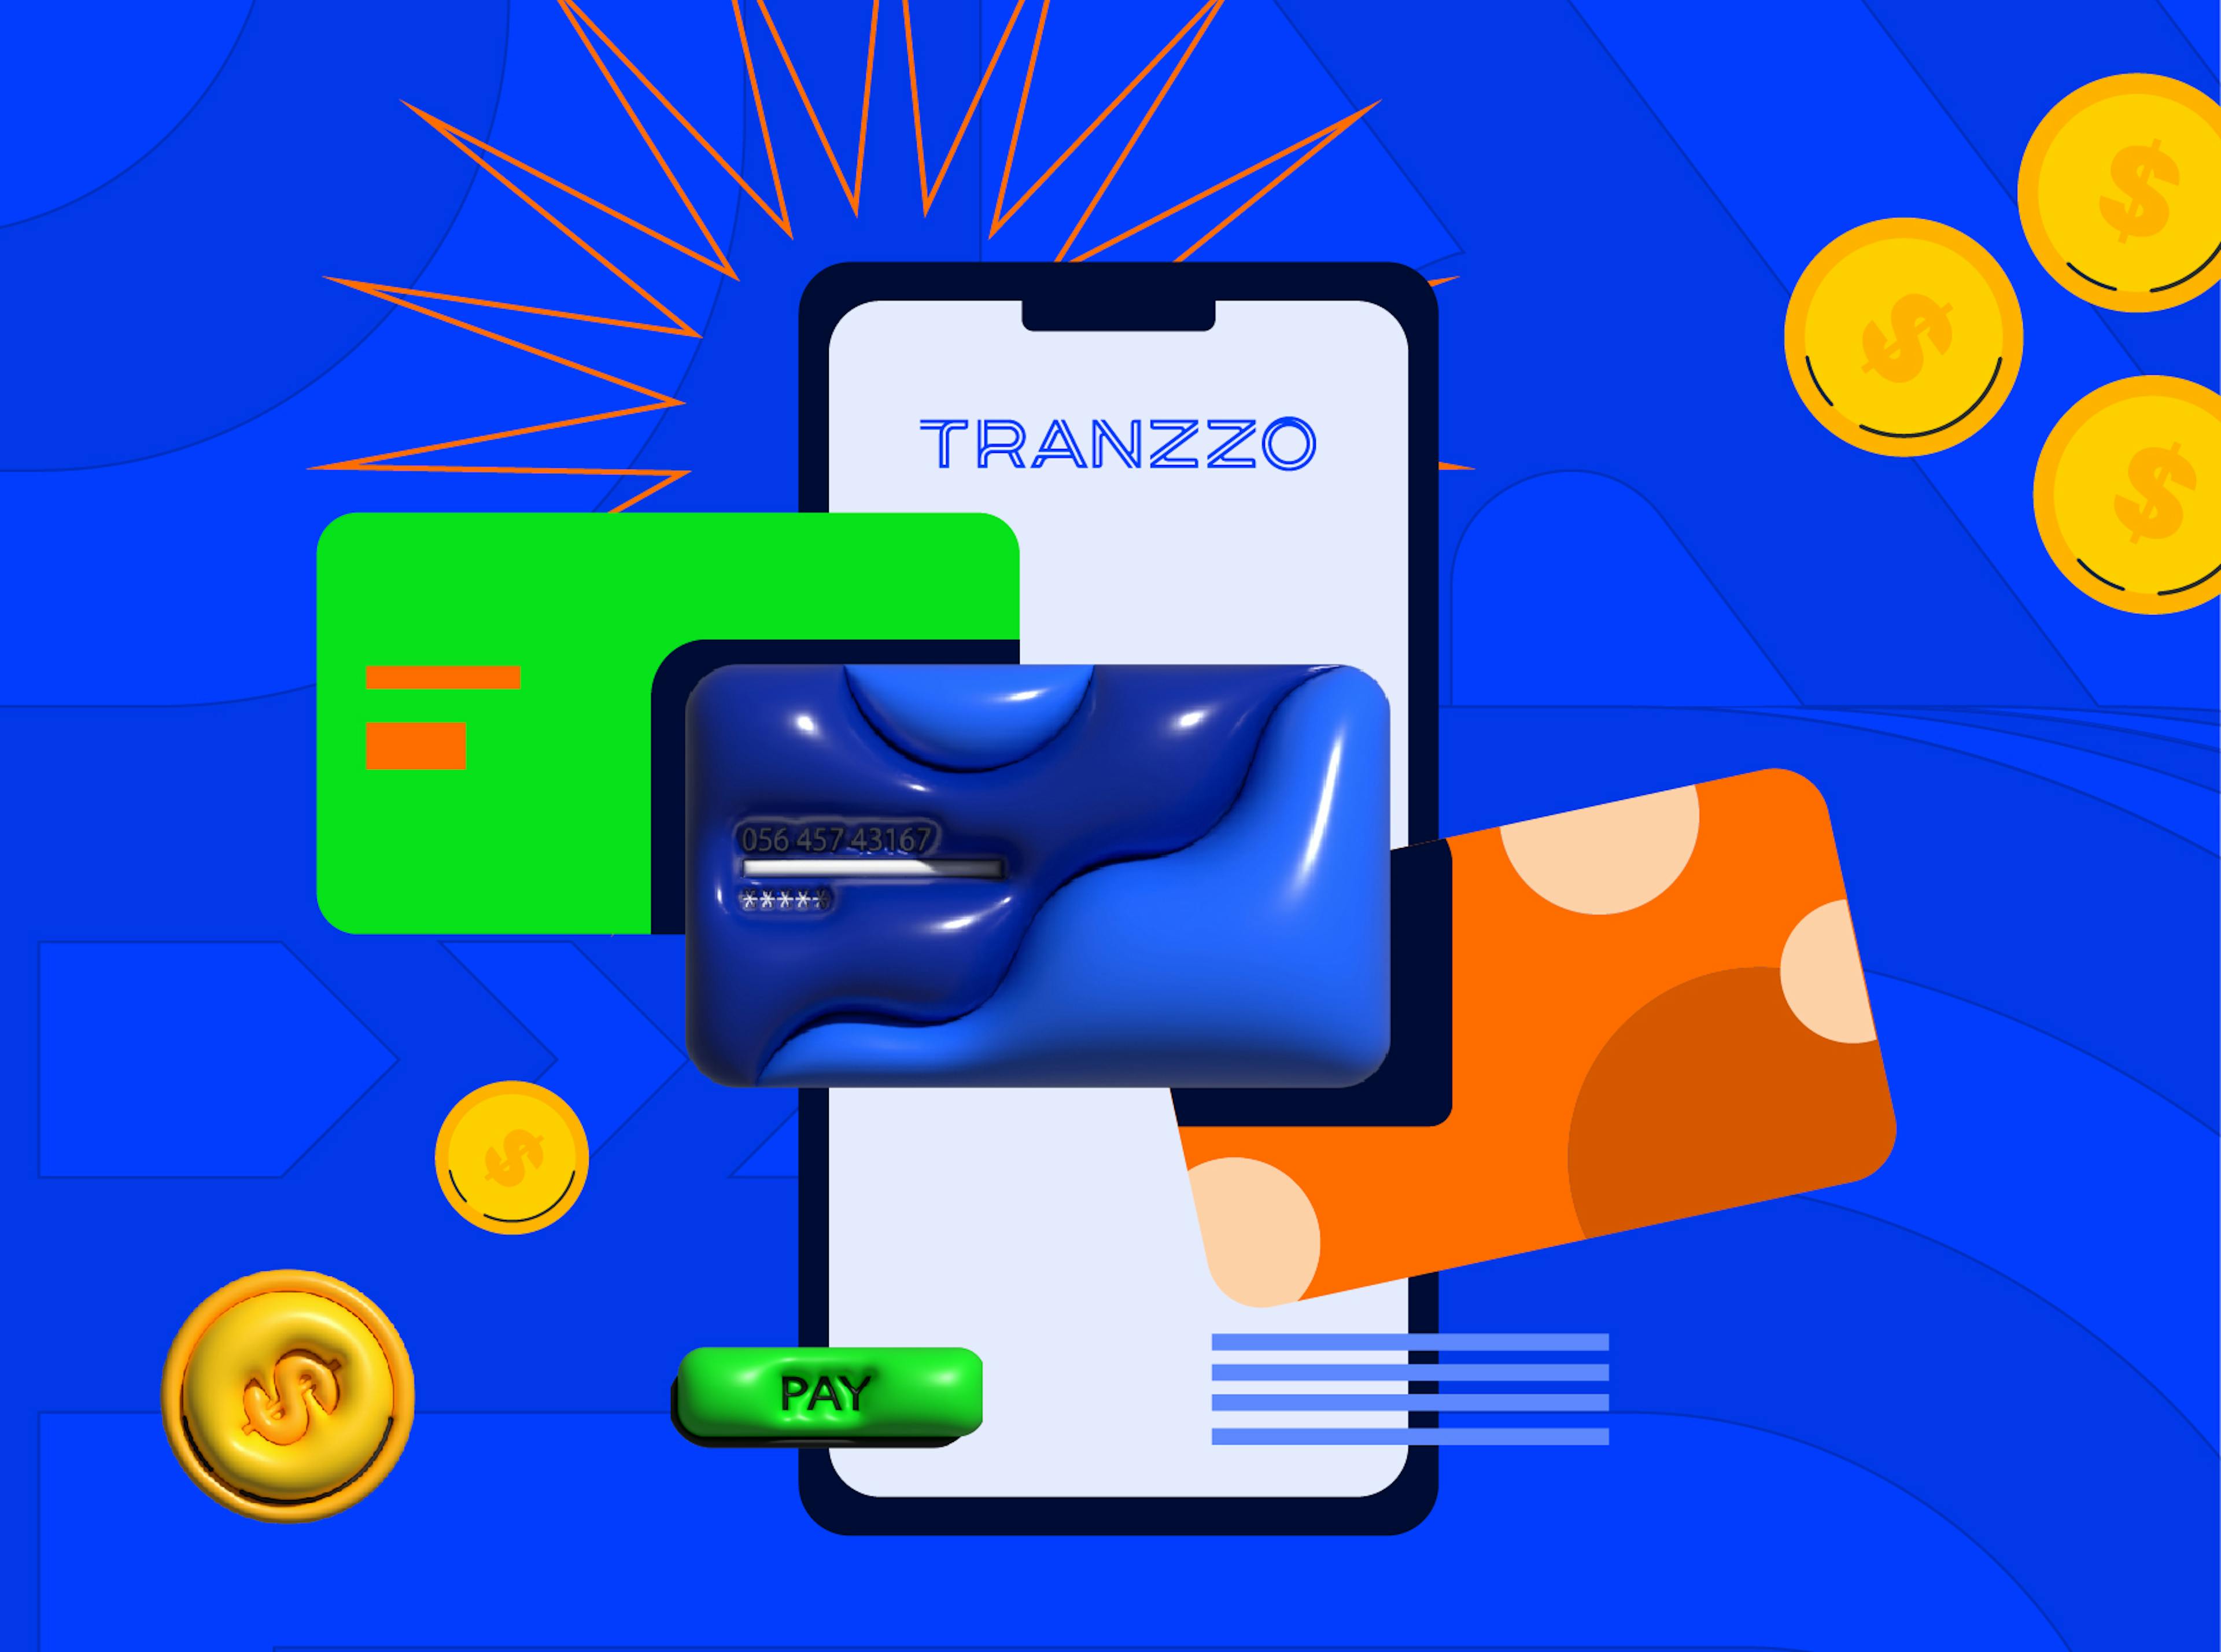 New payment widget from Tranzzo